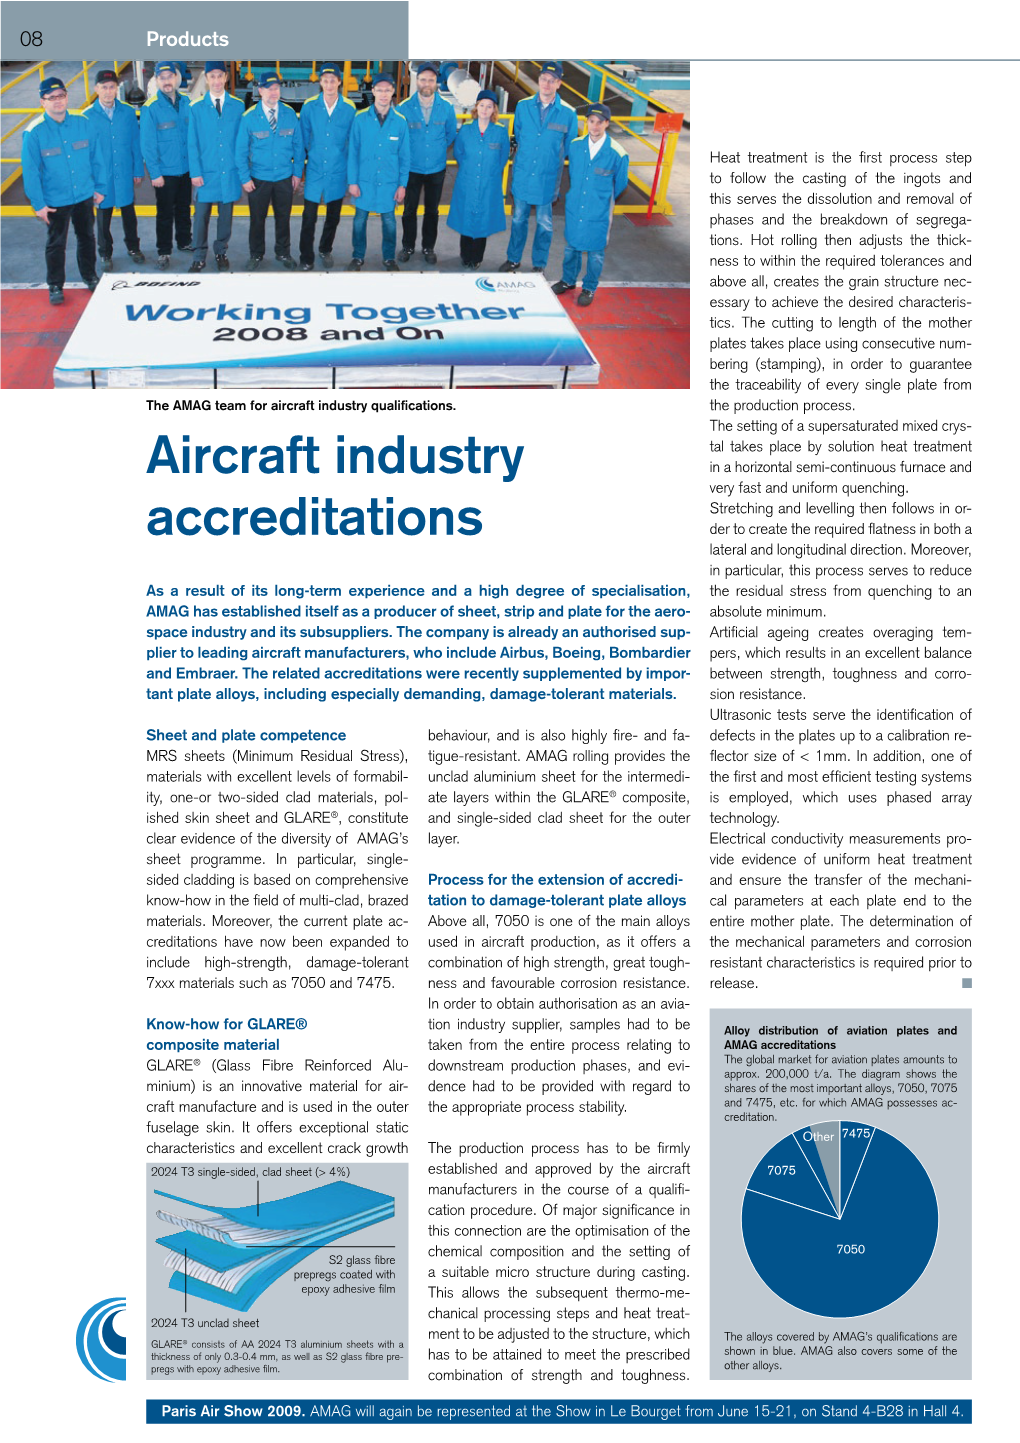 Aircraft Industry Accreditations